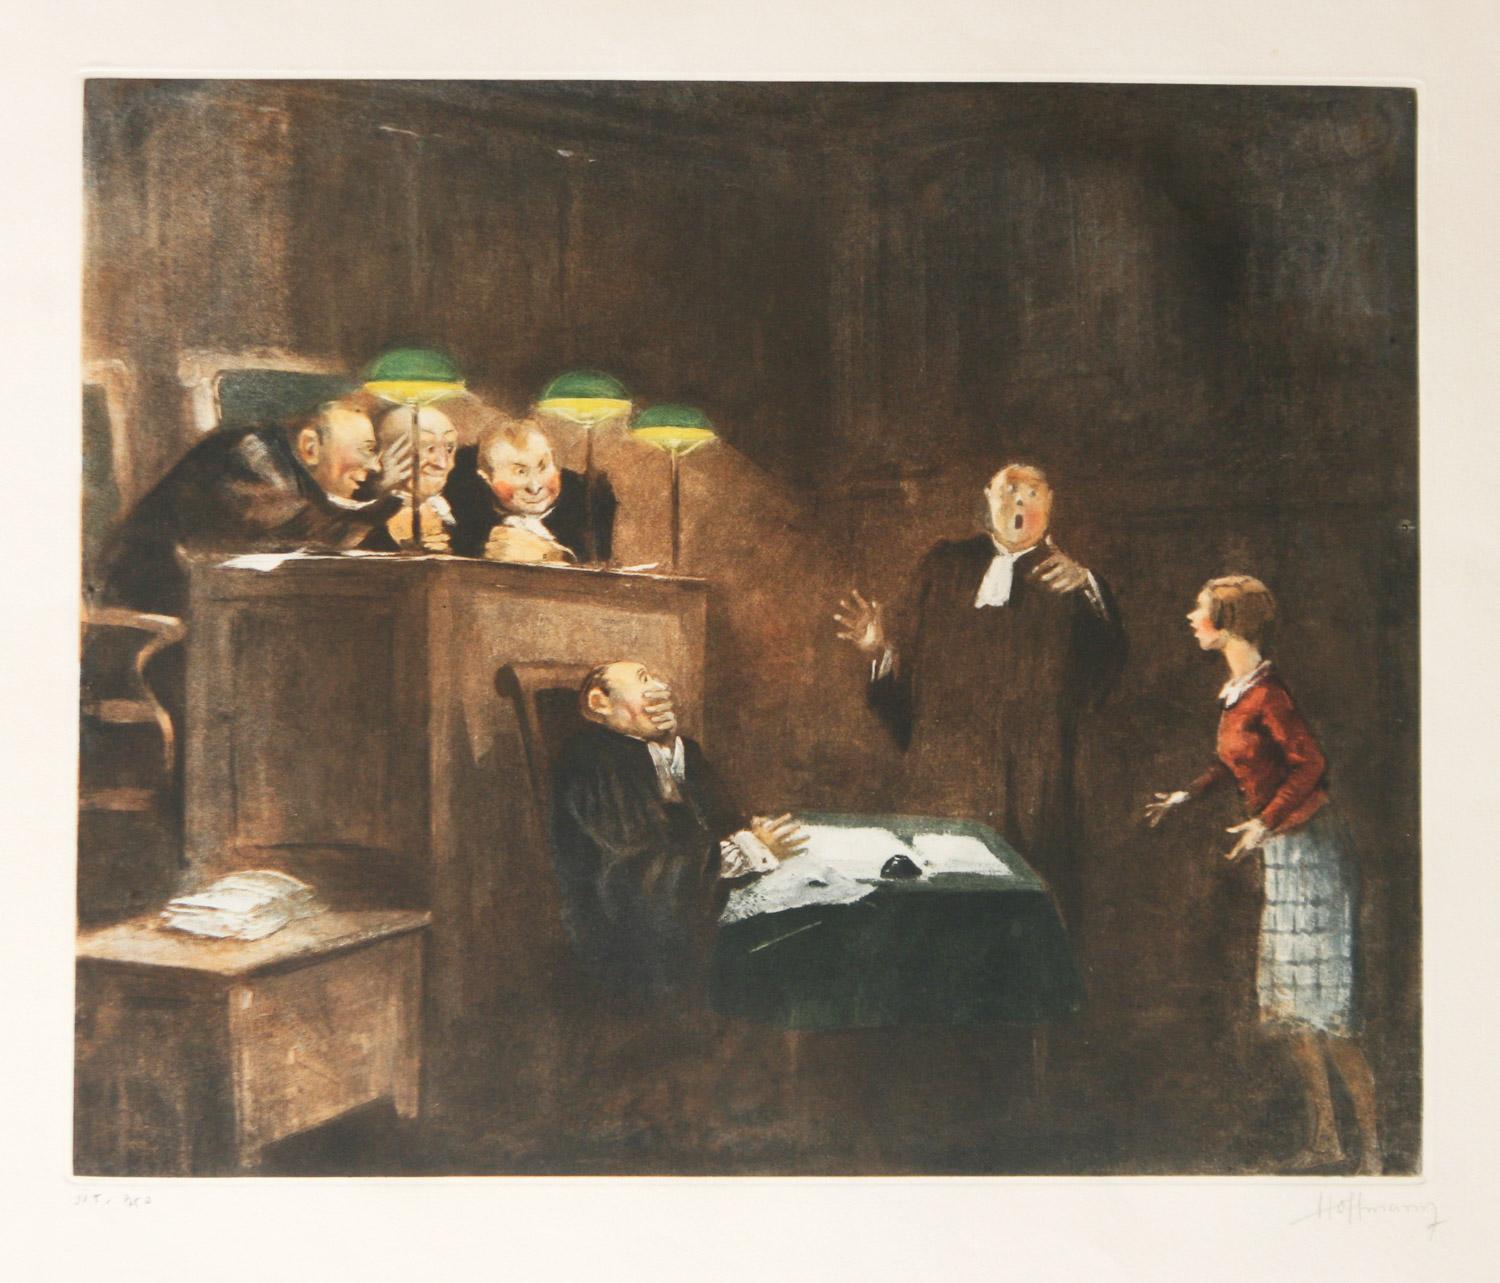 Three courtroom scenes original signed etchings by French artist Gaston Hoffman - Print by Gaston Hoffmann